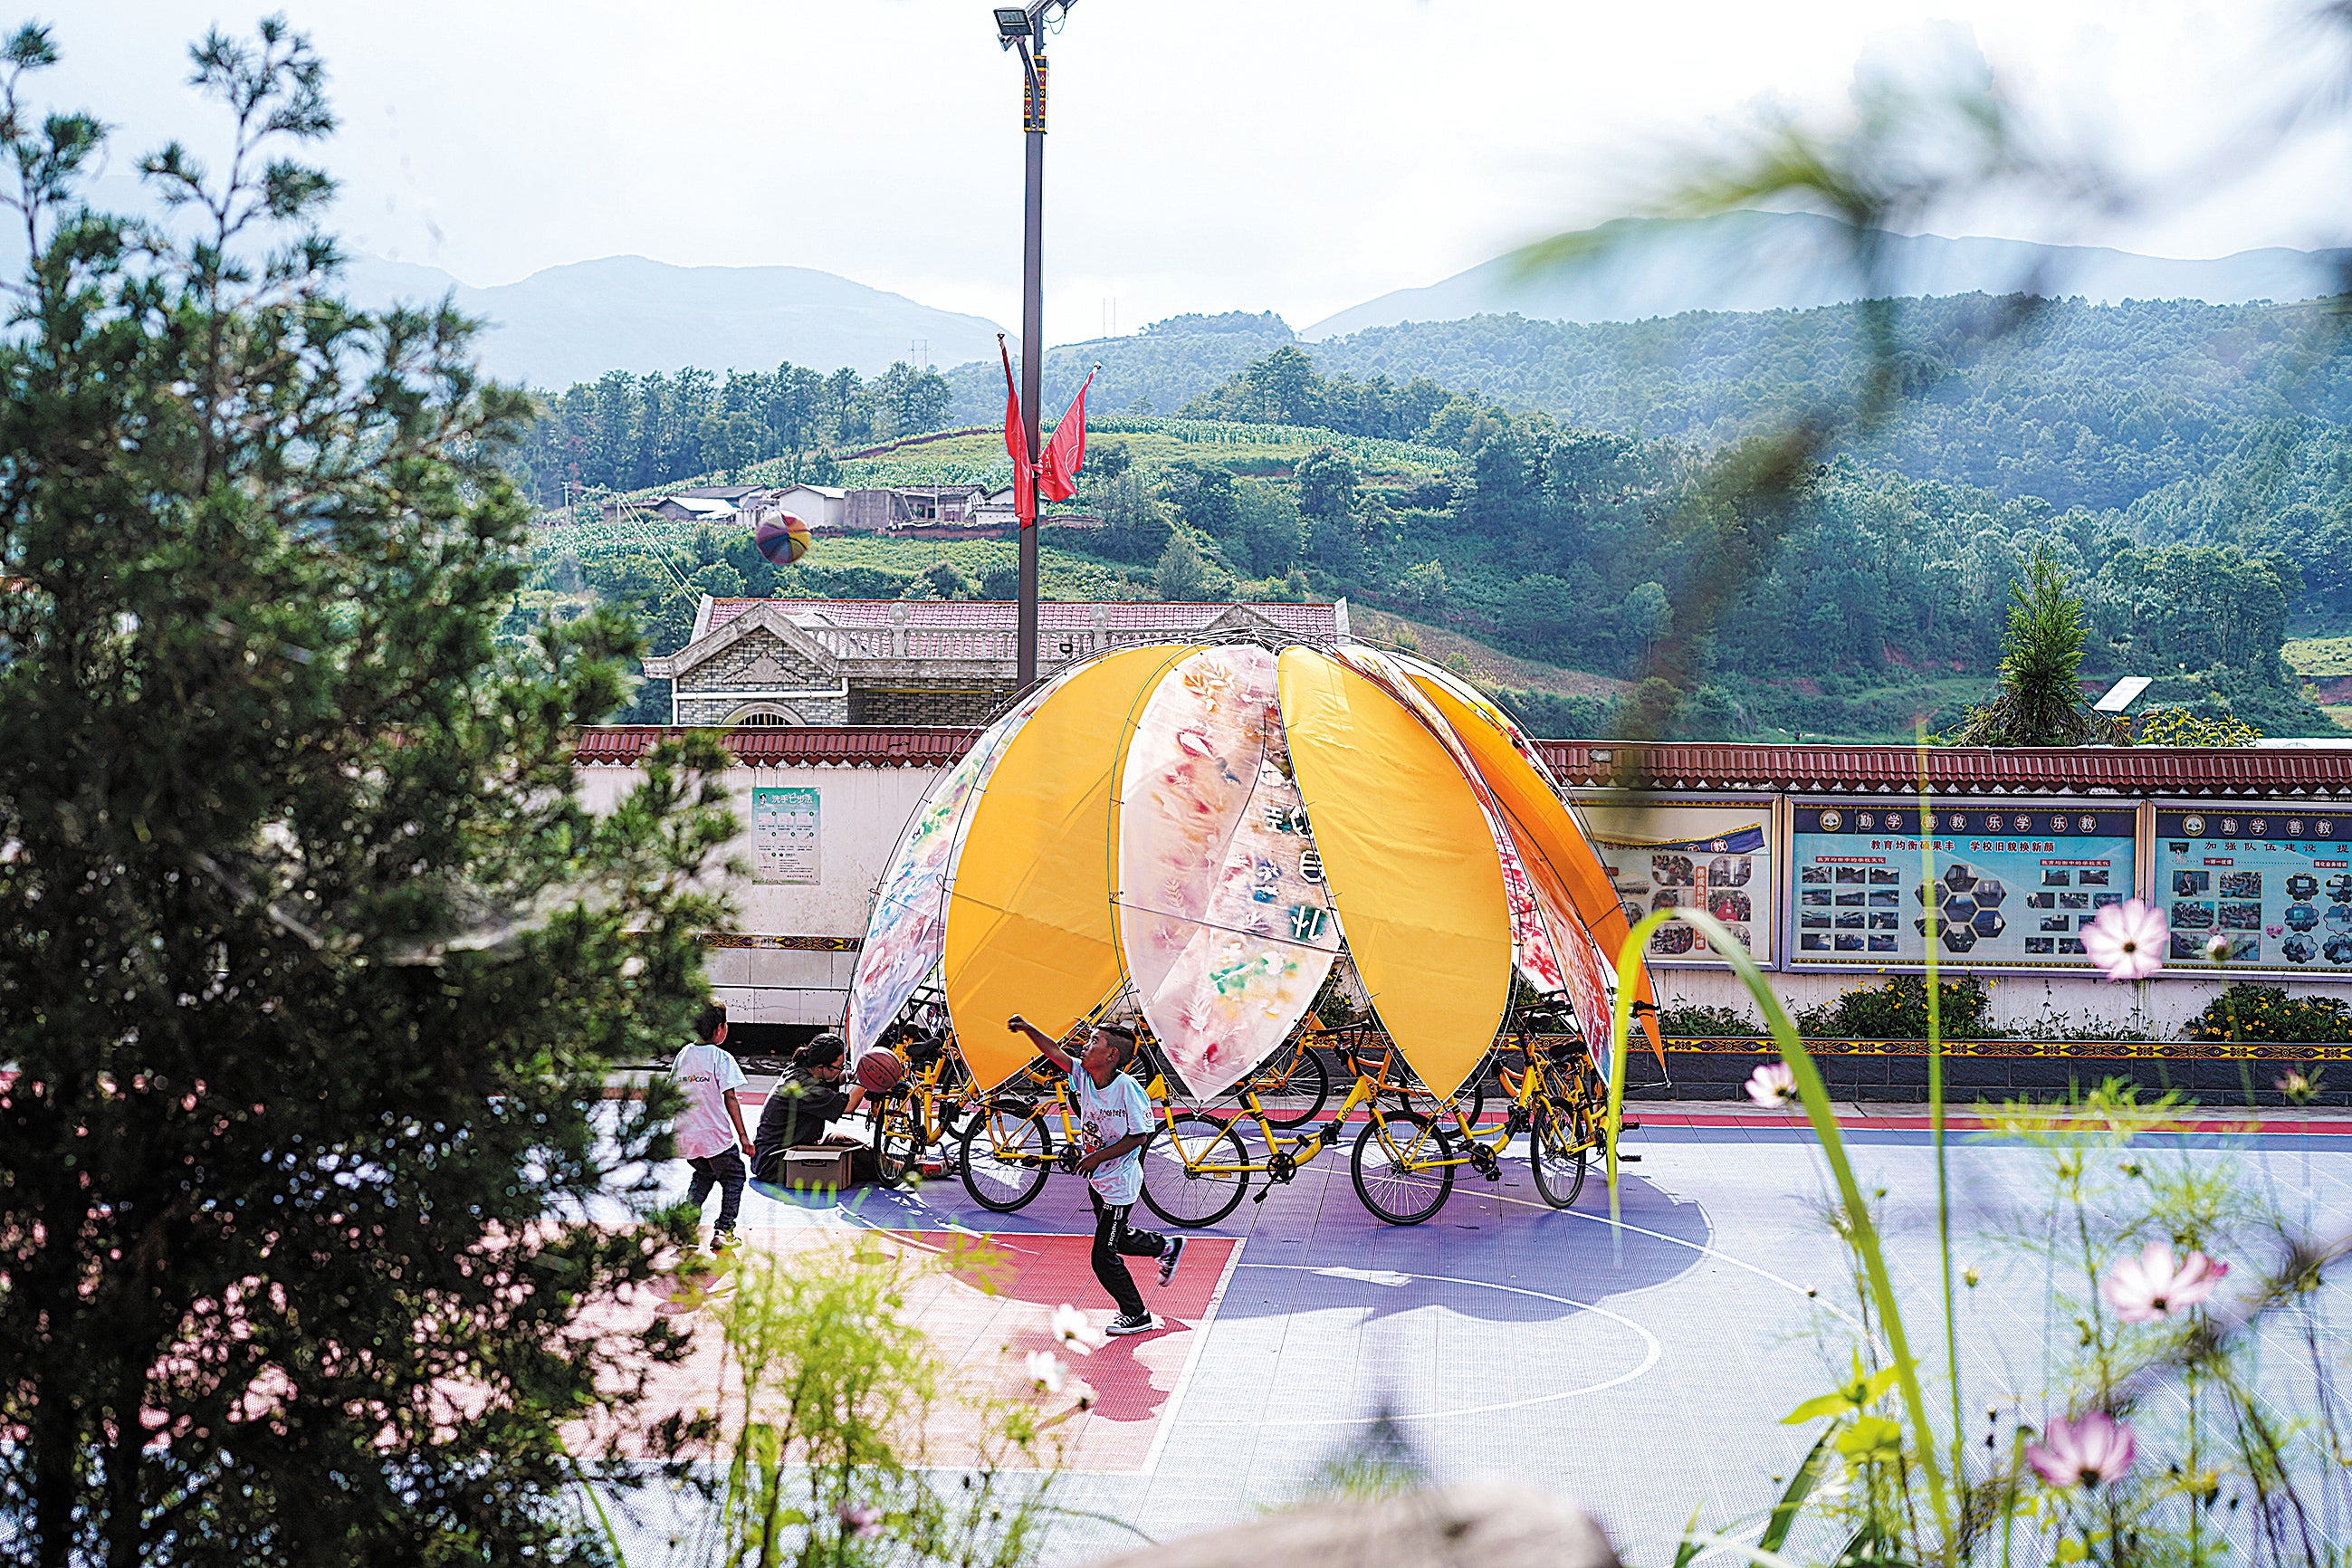 Children create a carousel-like installation in Puge county, Liangshan Yi autonomous prefecture, Sichuan province